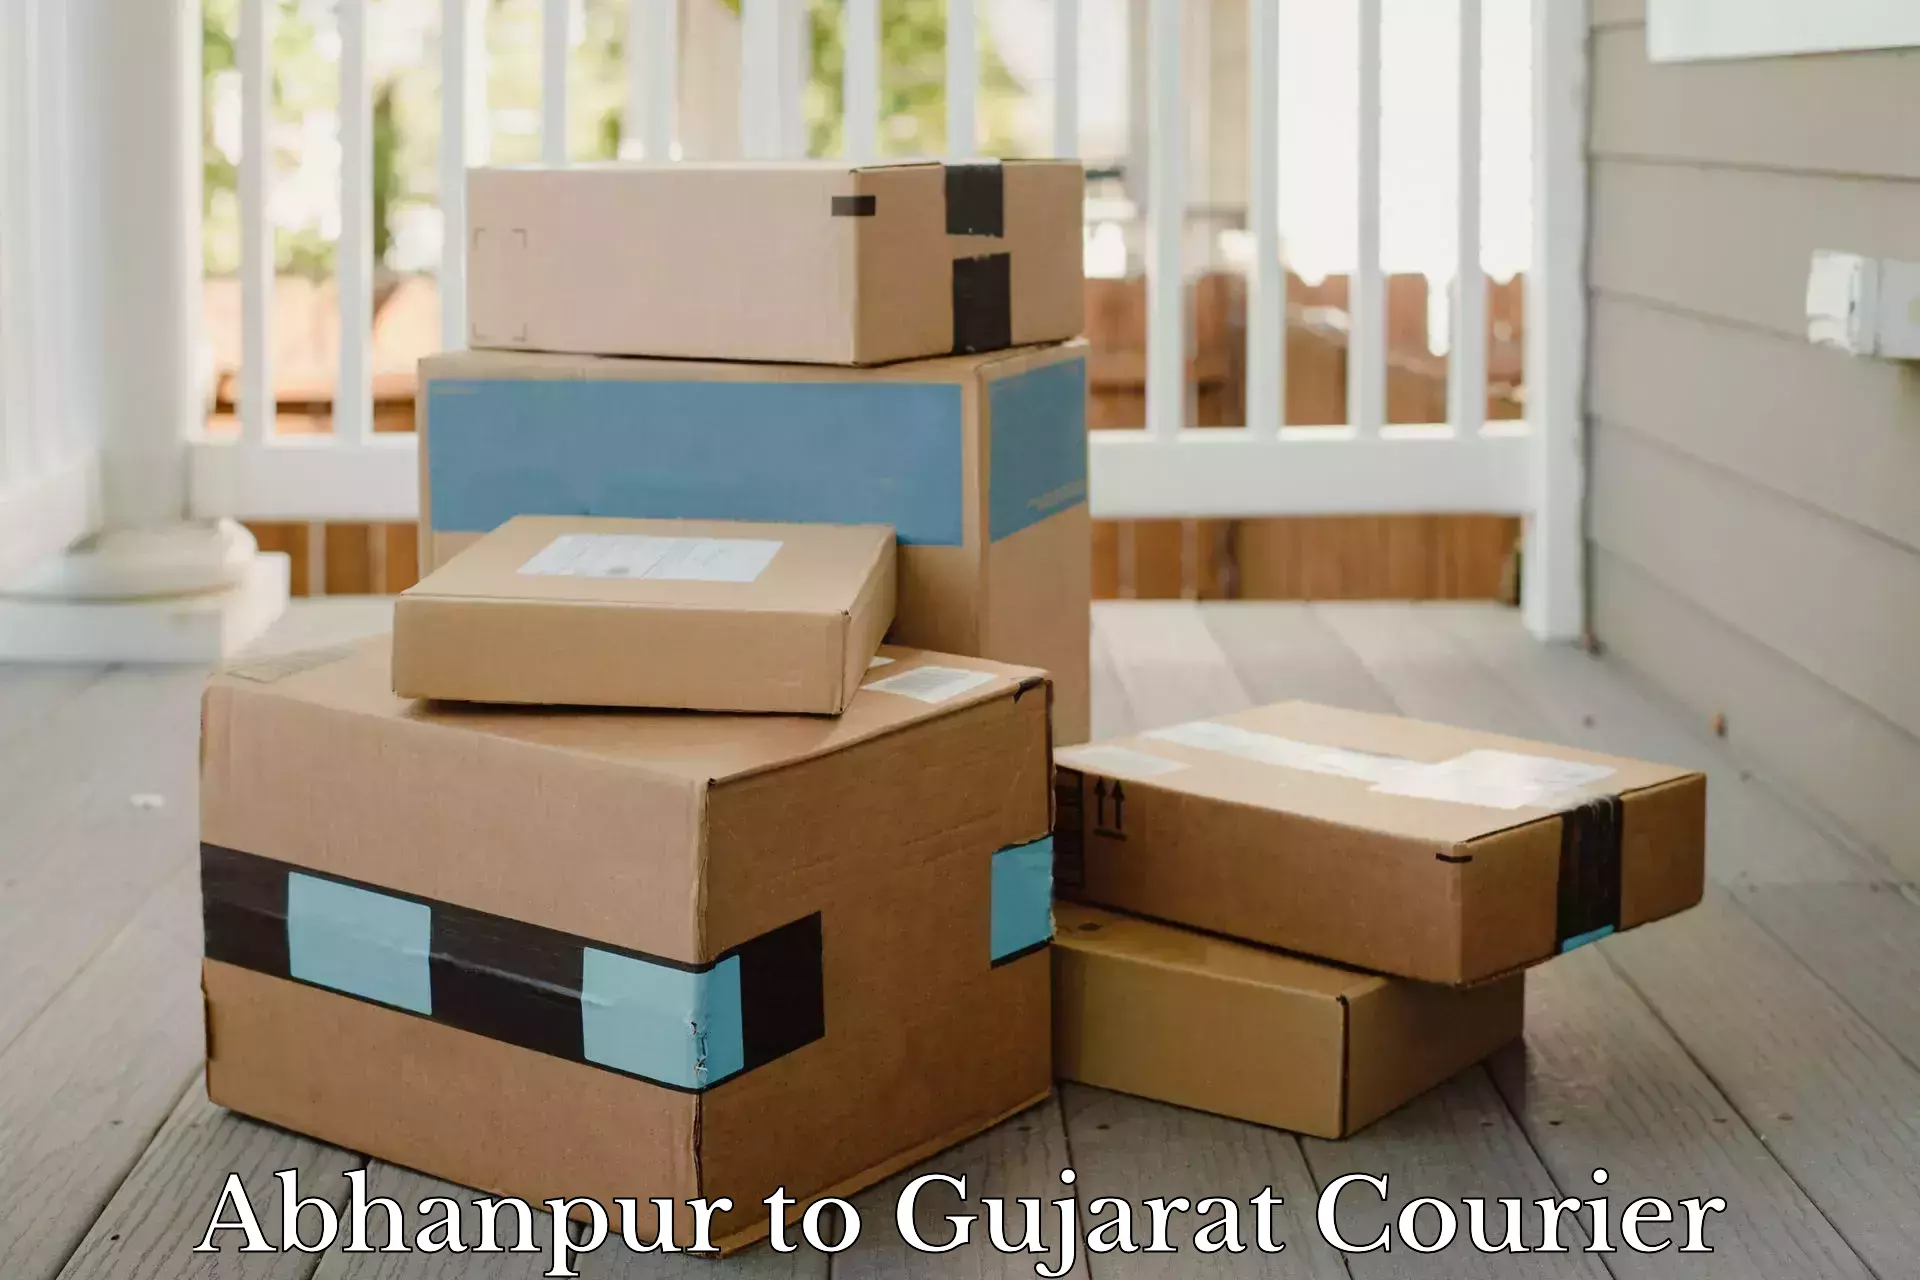 Weekend courier service Abhanpur to Dahej